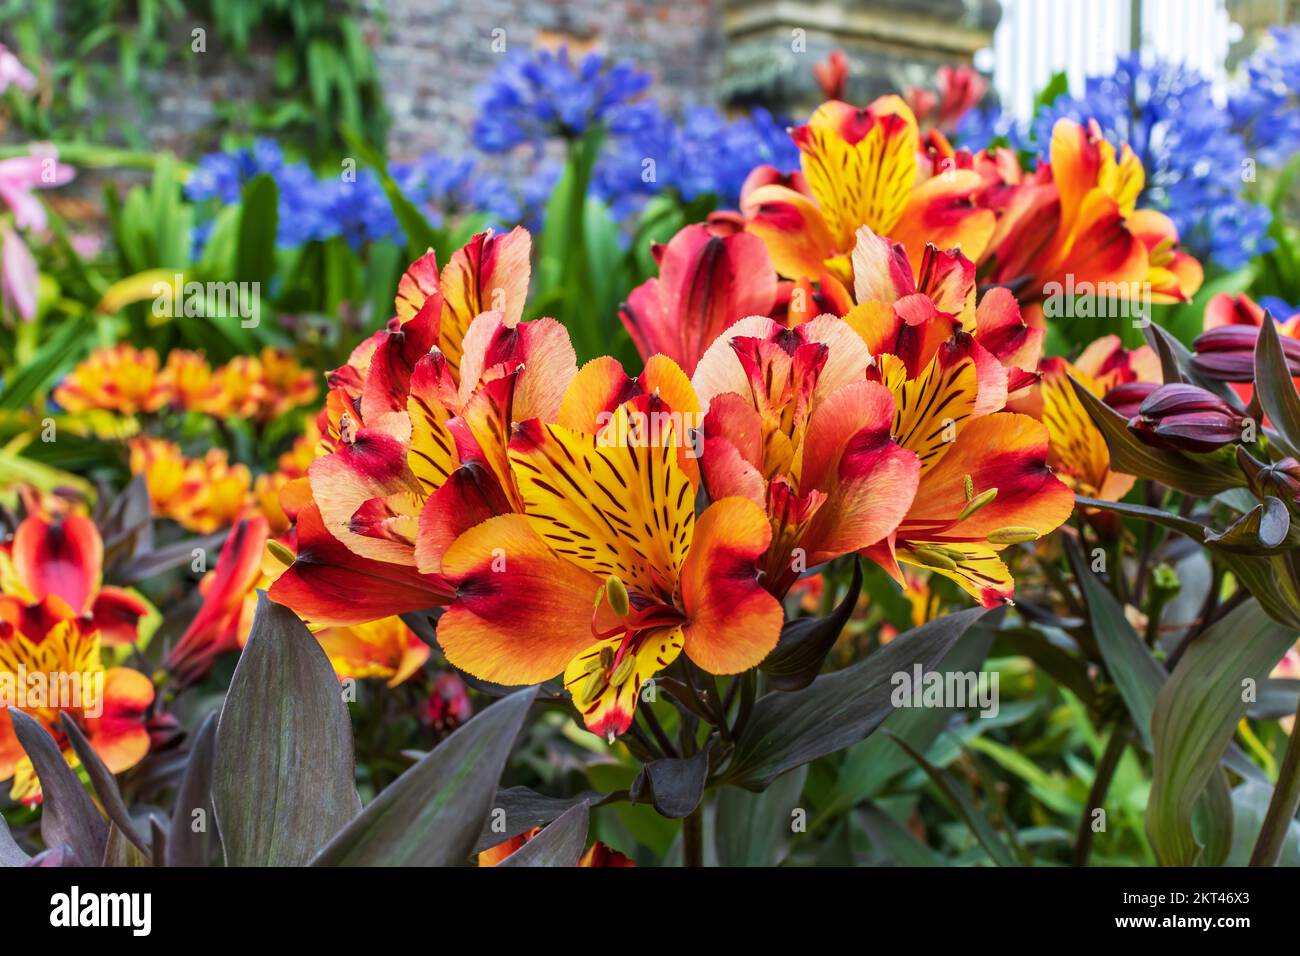 Alstroemeria Indian Summer, a vigorous perennial with coppery-orange and golden-yellow flowers in a garden herbaceous border. Stock Photo